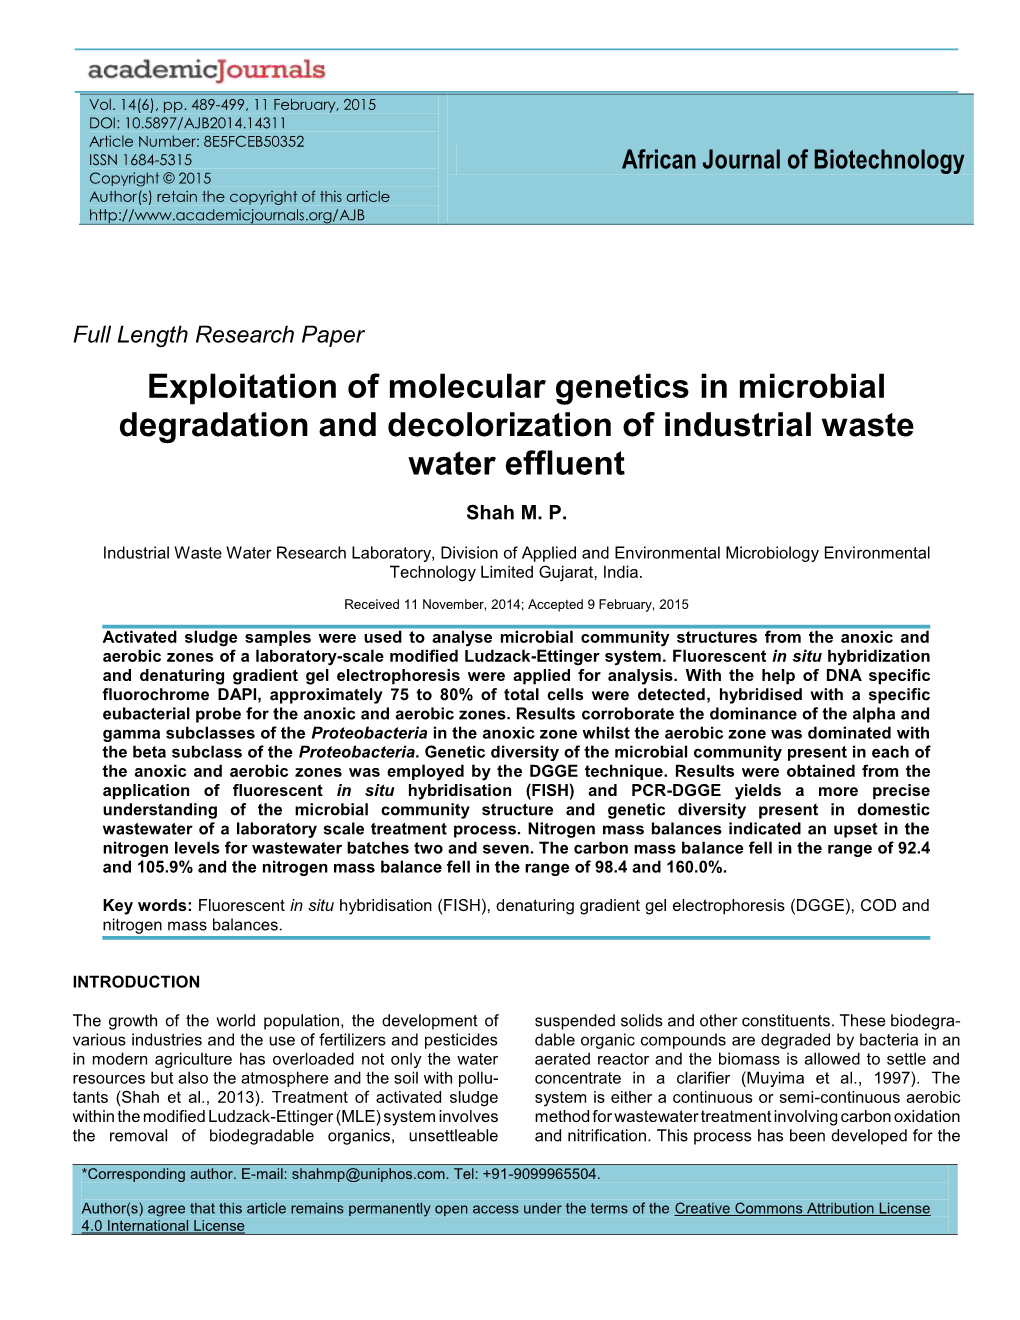 Exploitation of Molecular Genetics in Microbial Degradation and Decolorization of Industrial Waste Water Effluent